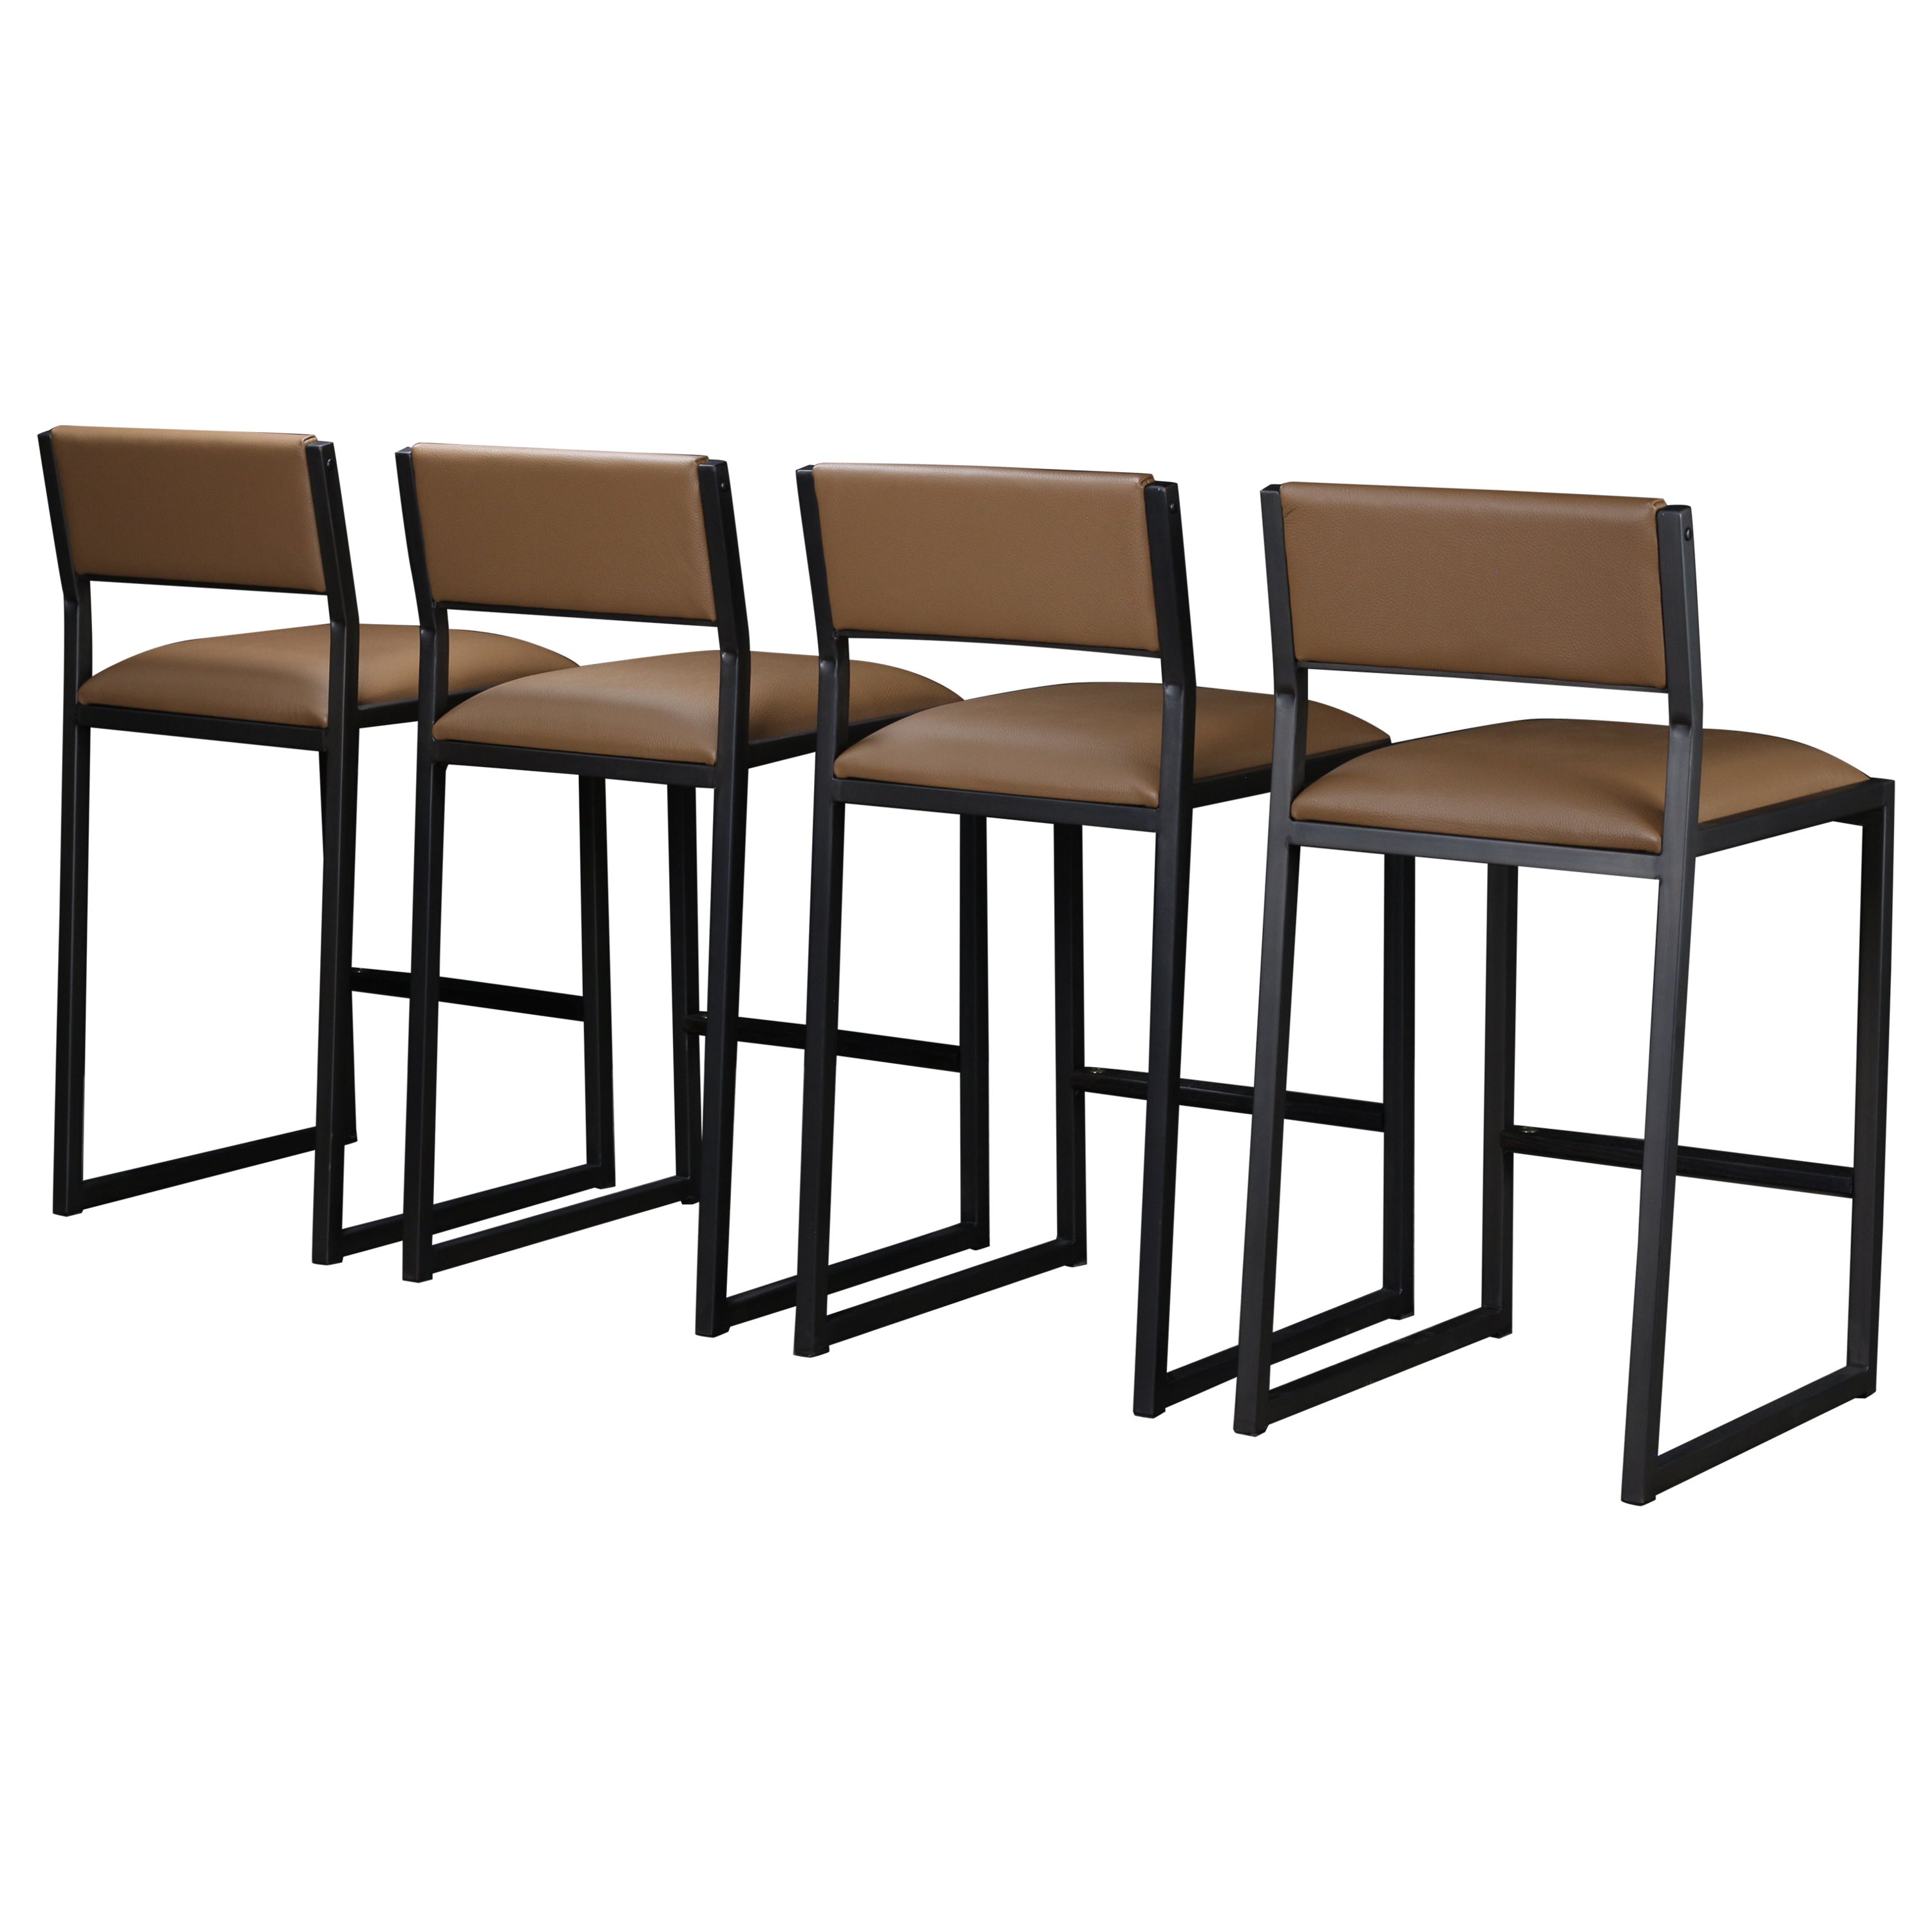 4x Shaker Counter Stools in, Sedona Leather, Blackened Steel & Oxidized Oak For Sale